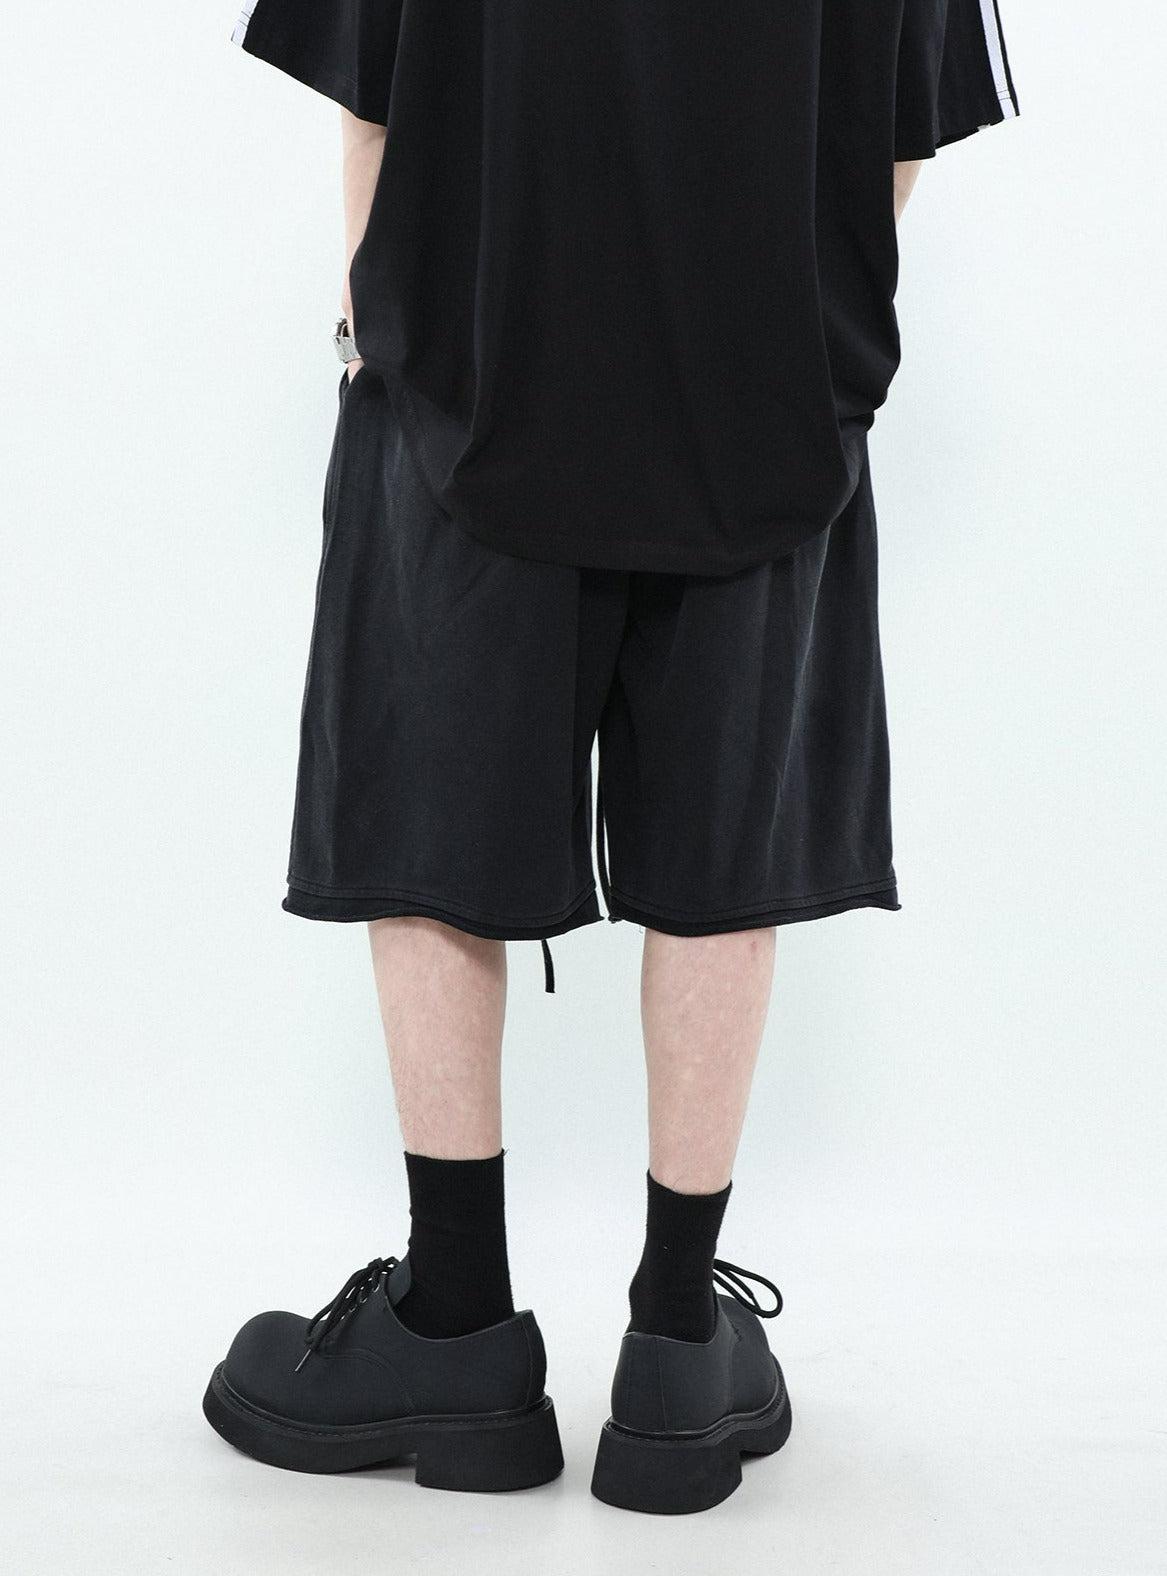 Mr Nearly Drawstring Embroidered Text Sweat Shorts Korean Street Fashion Shorts By Mr Nearly Shop Online at OH Vault